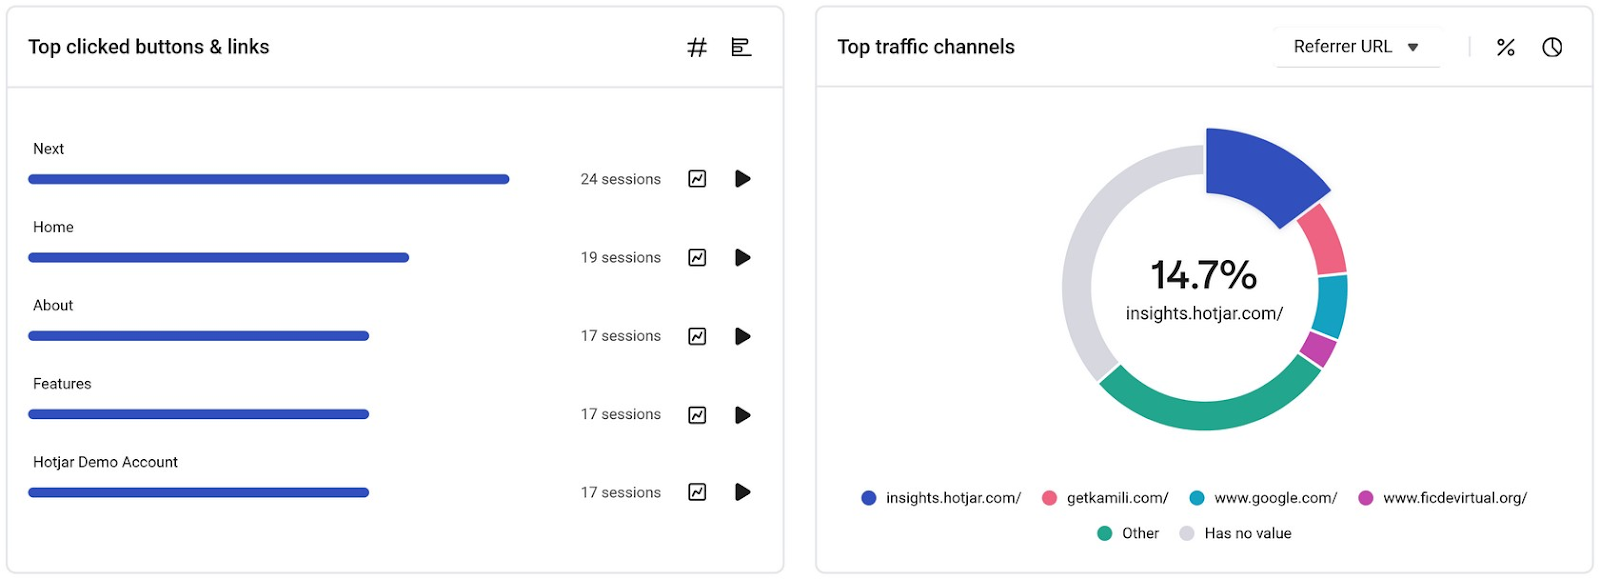 "Top clicked buttons & links" and "Top traffic channels" widgets in Hotjar’s dashboard